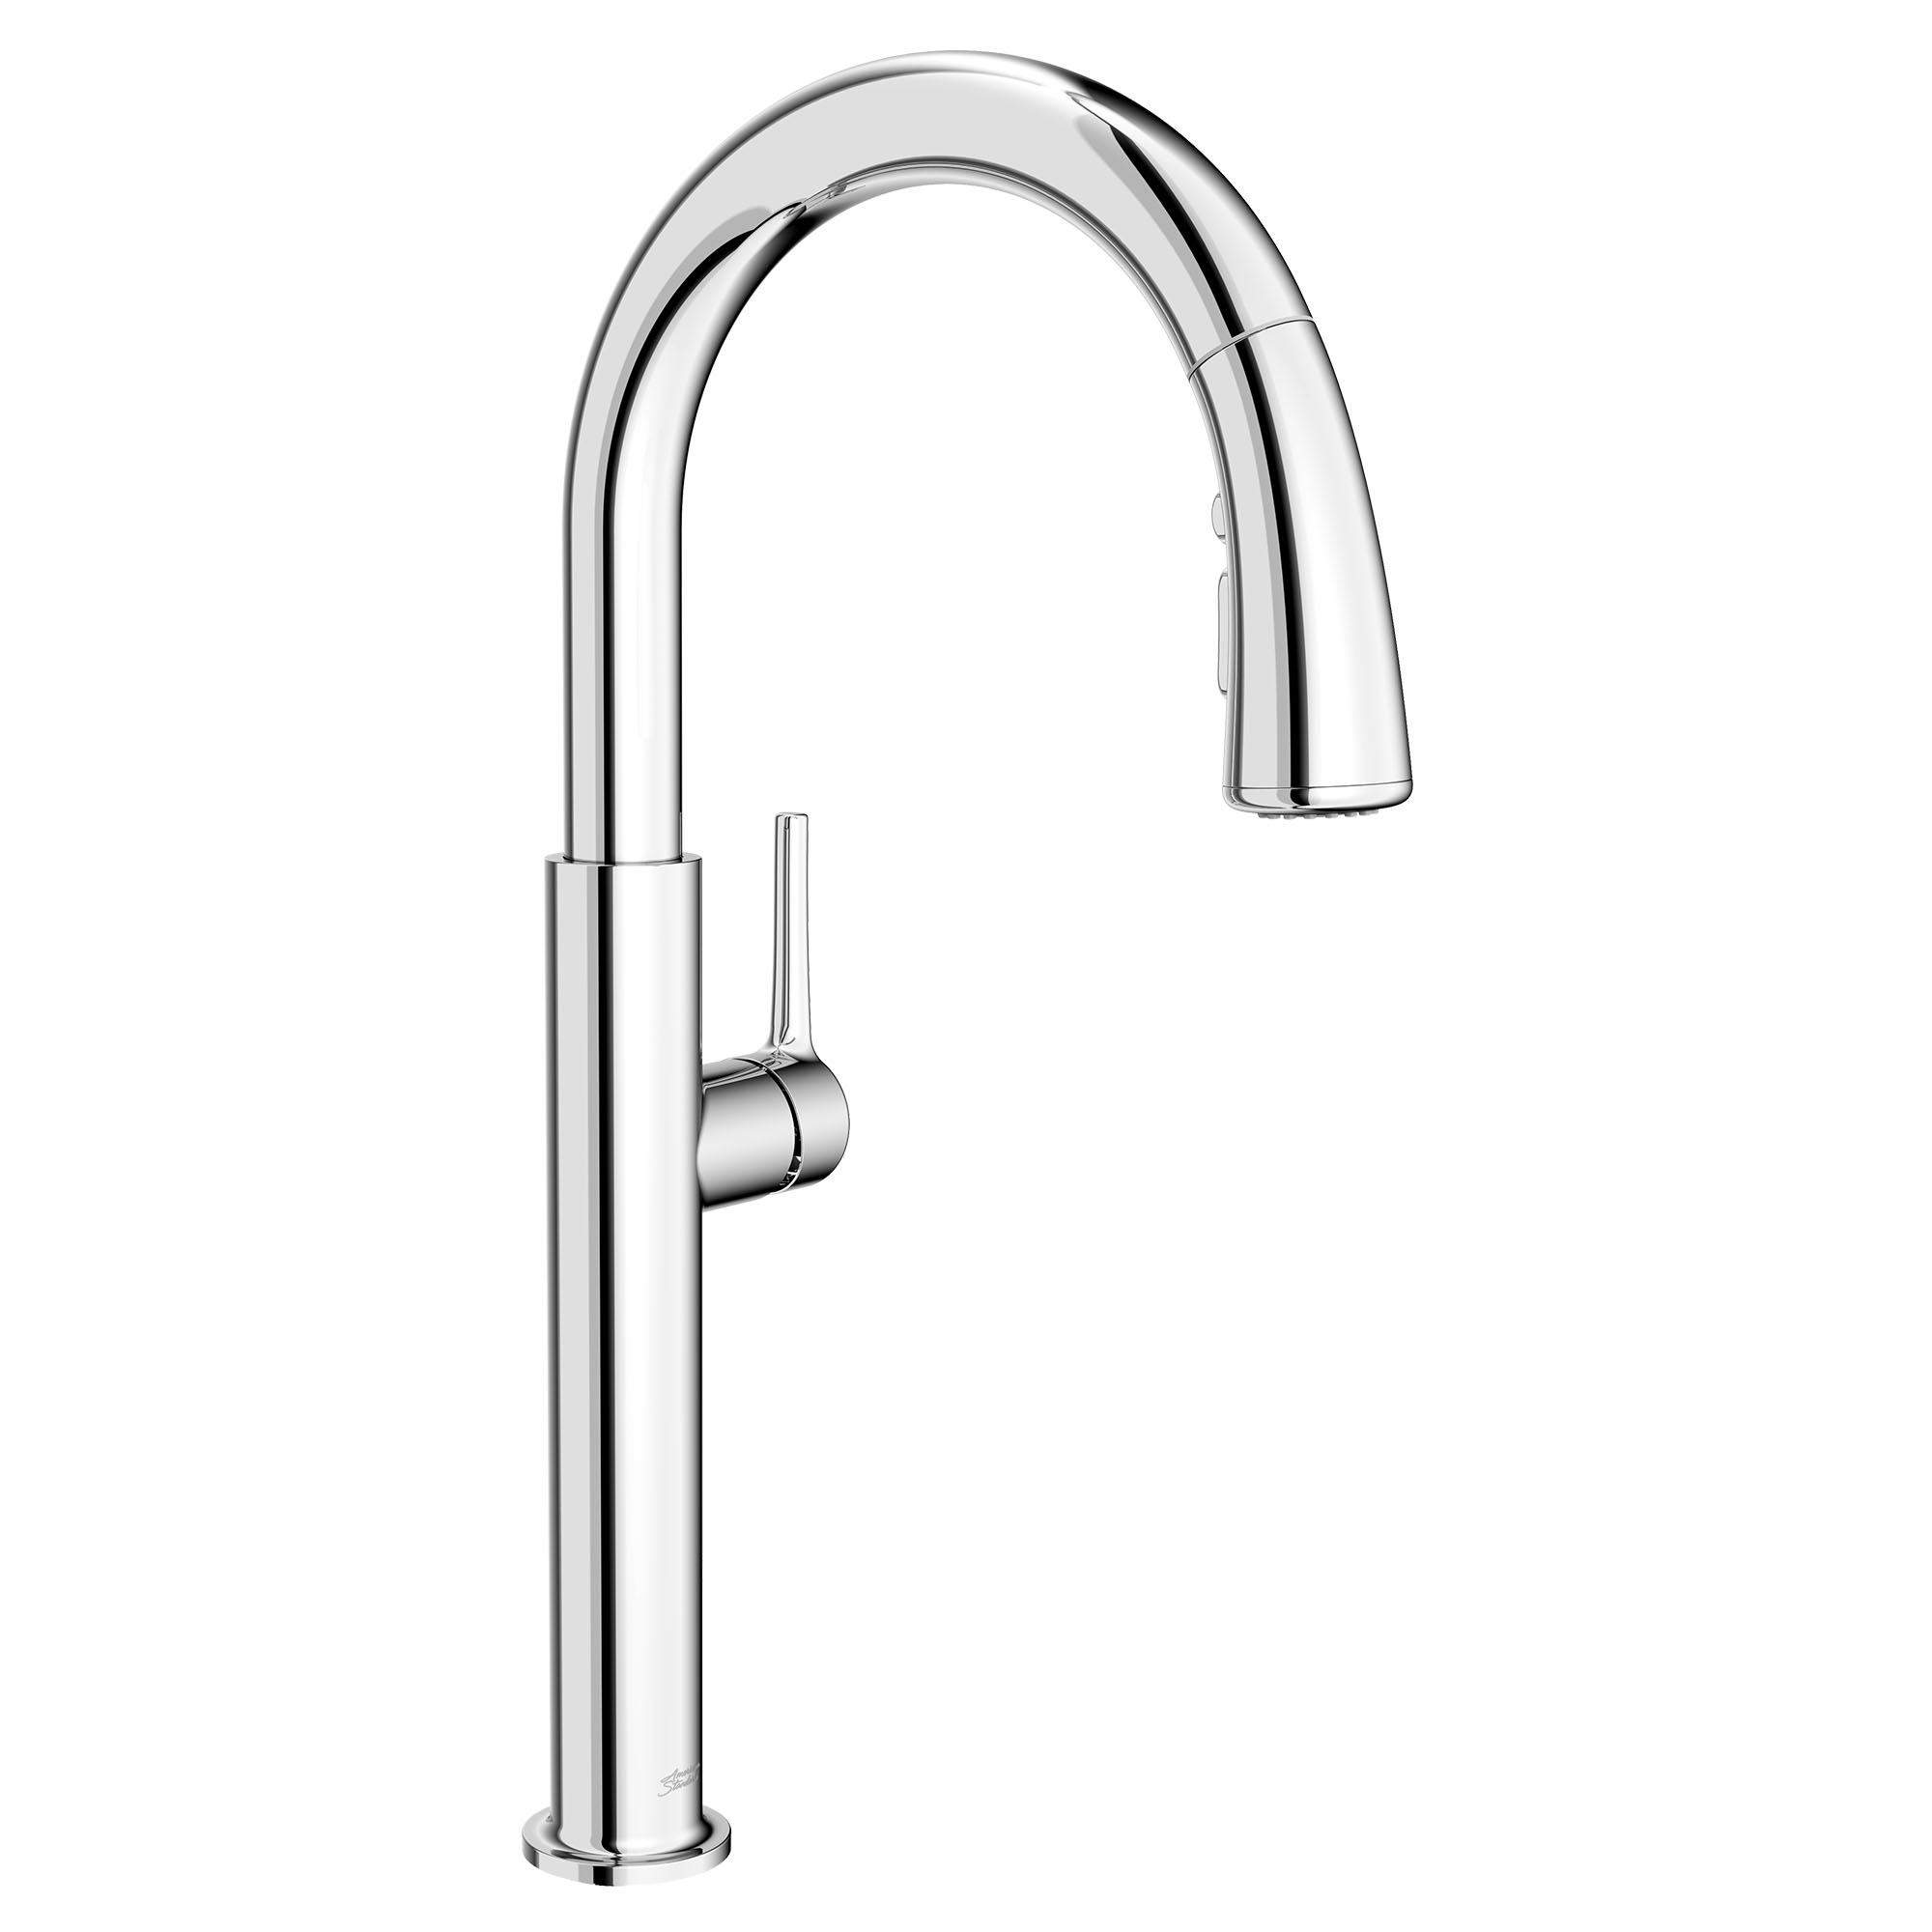 Studio™ S Pull-Down Dual Spray Kitchen Faucet